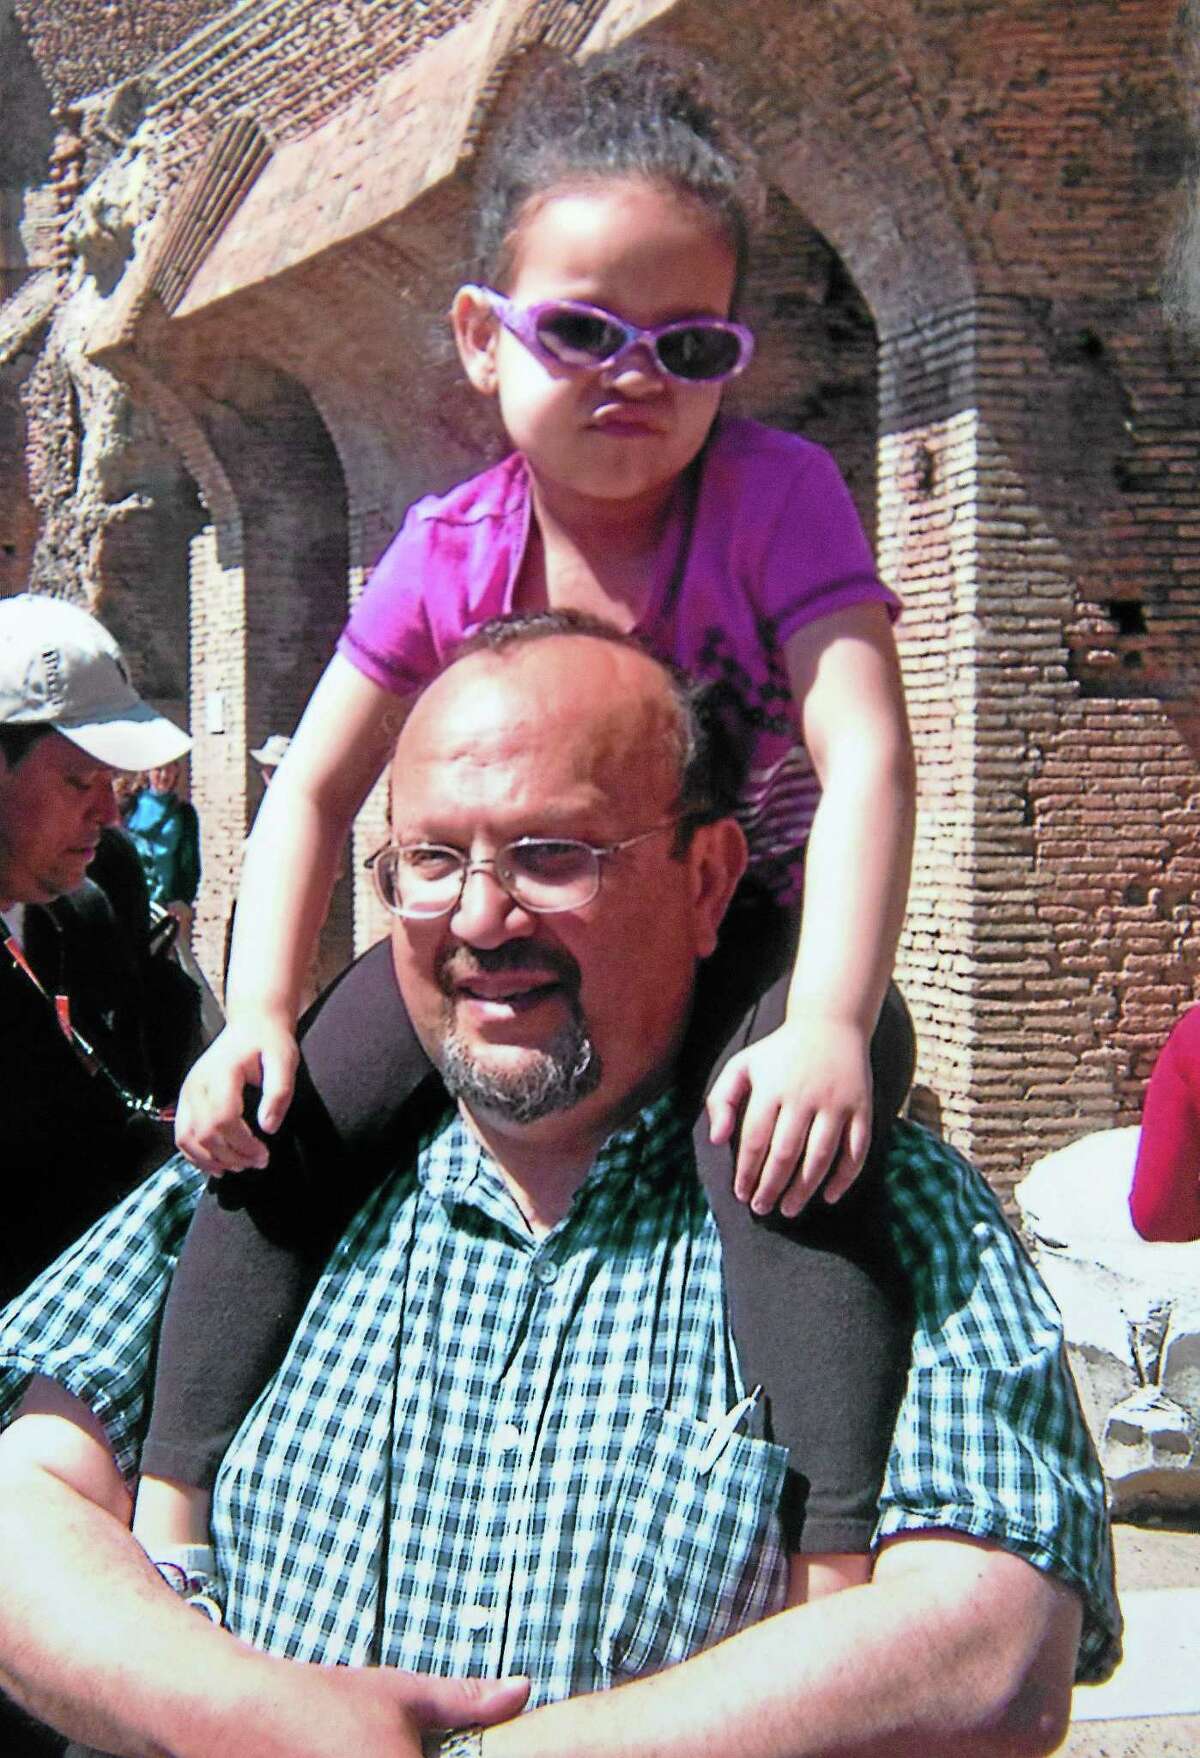 Arnold Giammarco and his daughter, Blair, in a photo taken in Italy.